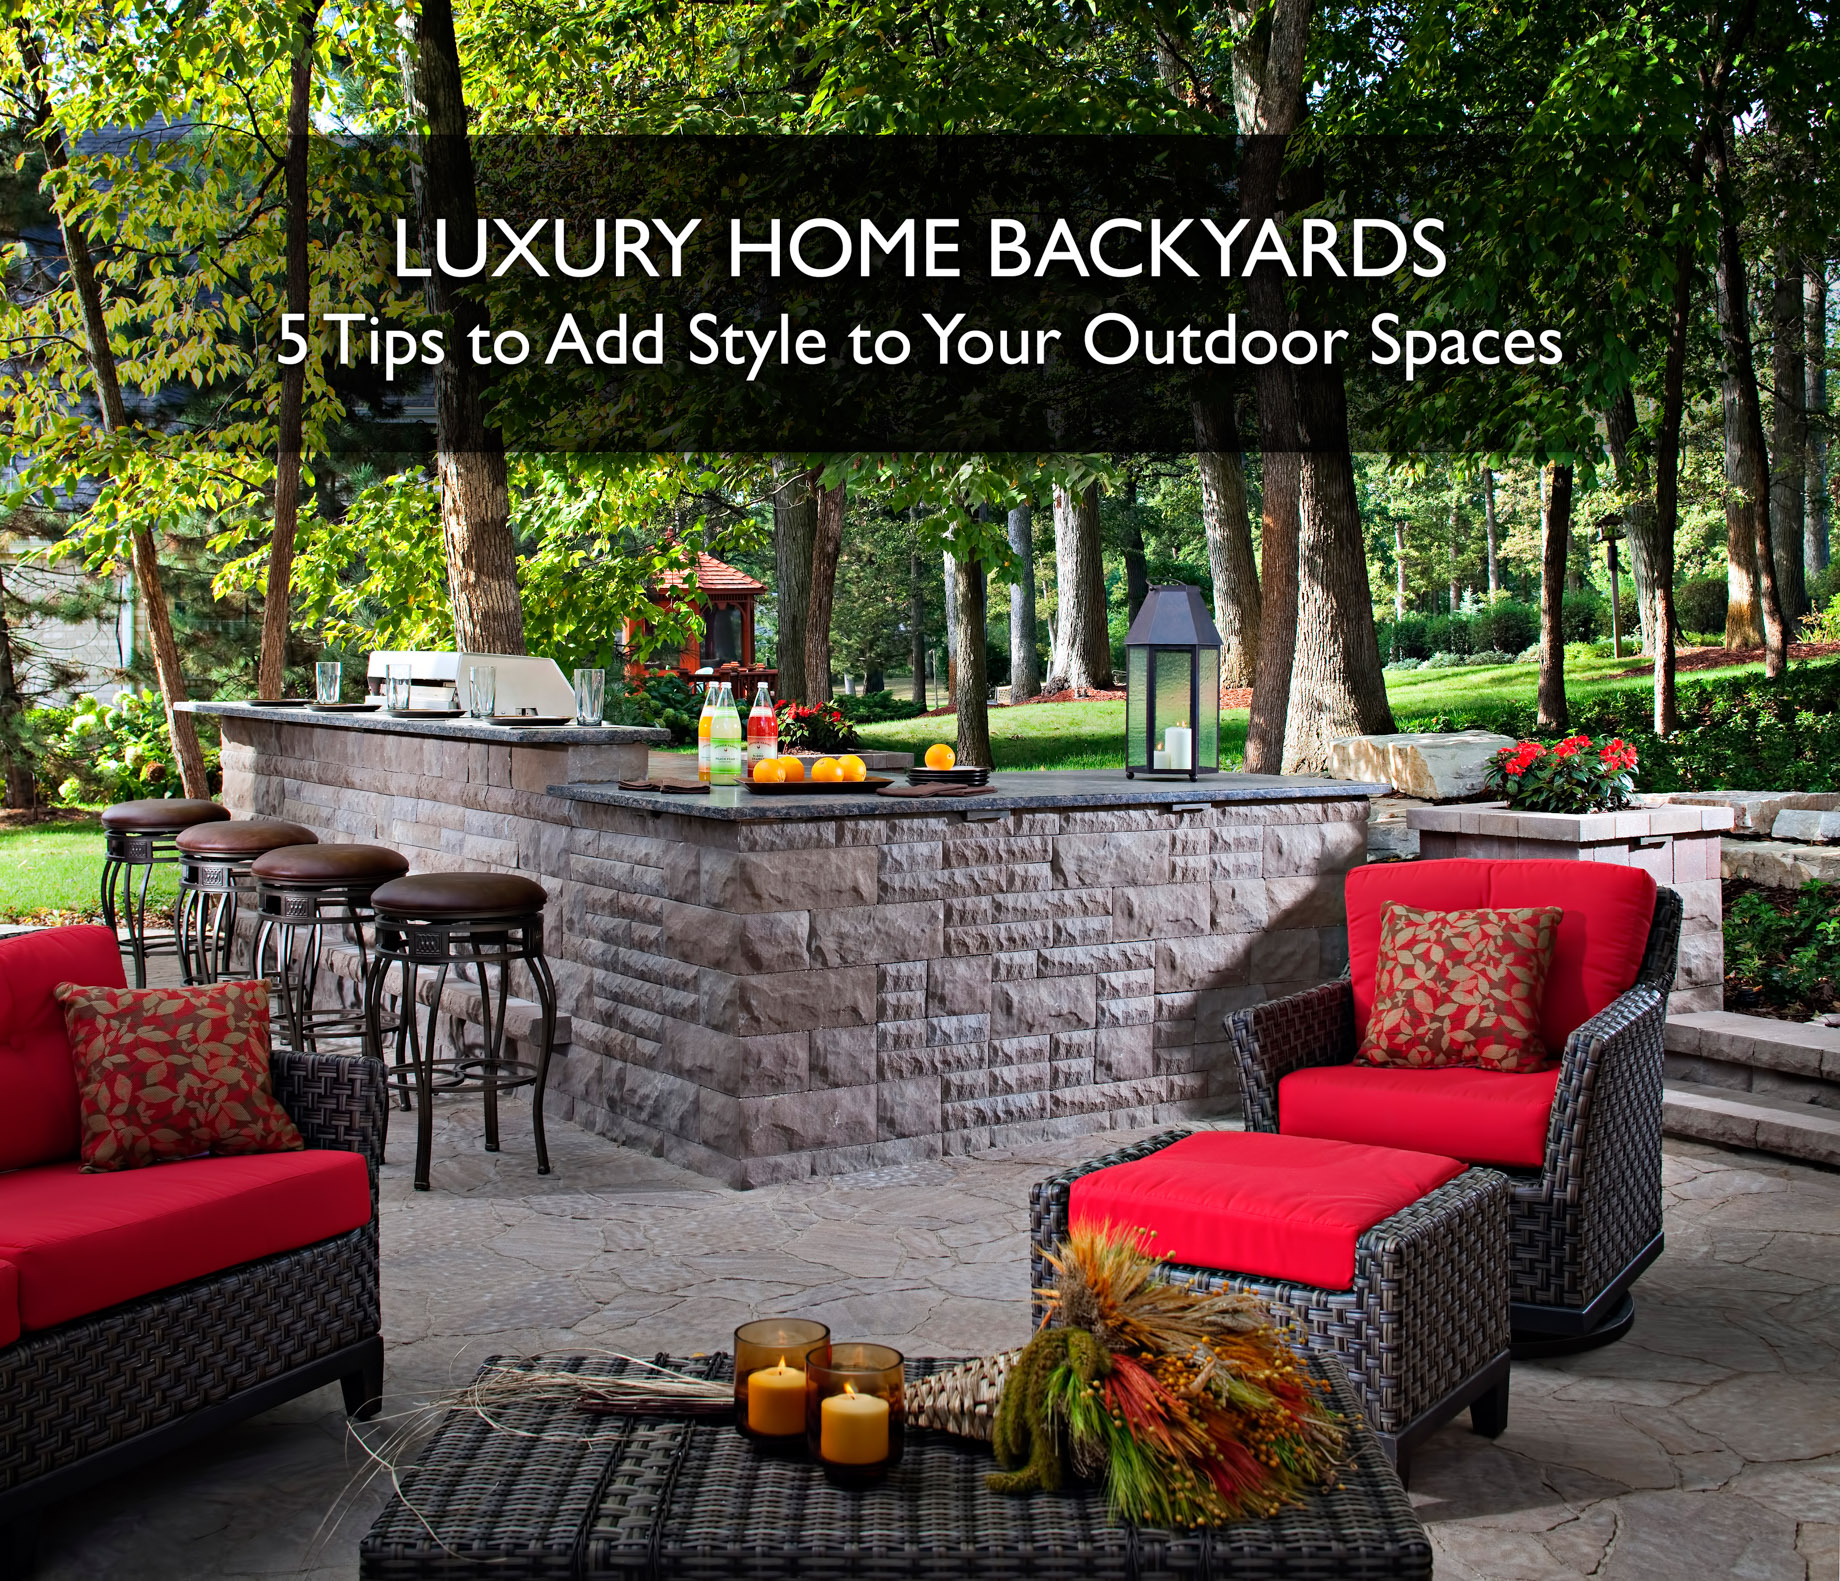 Luxury Home Backyards - 5 Tips to Add Style to Your Outdoor Spaces